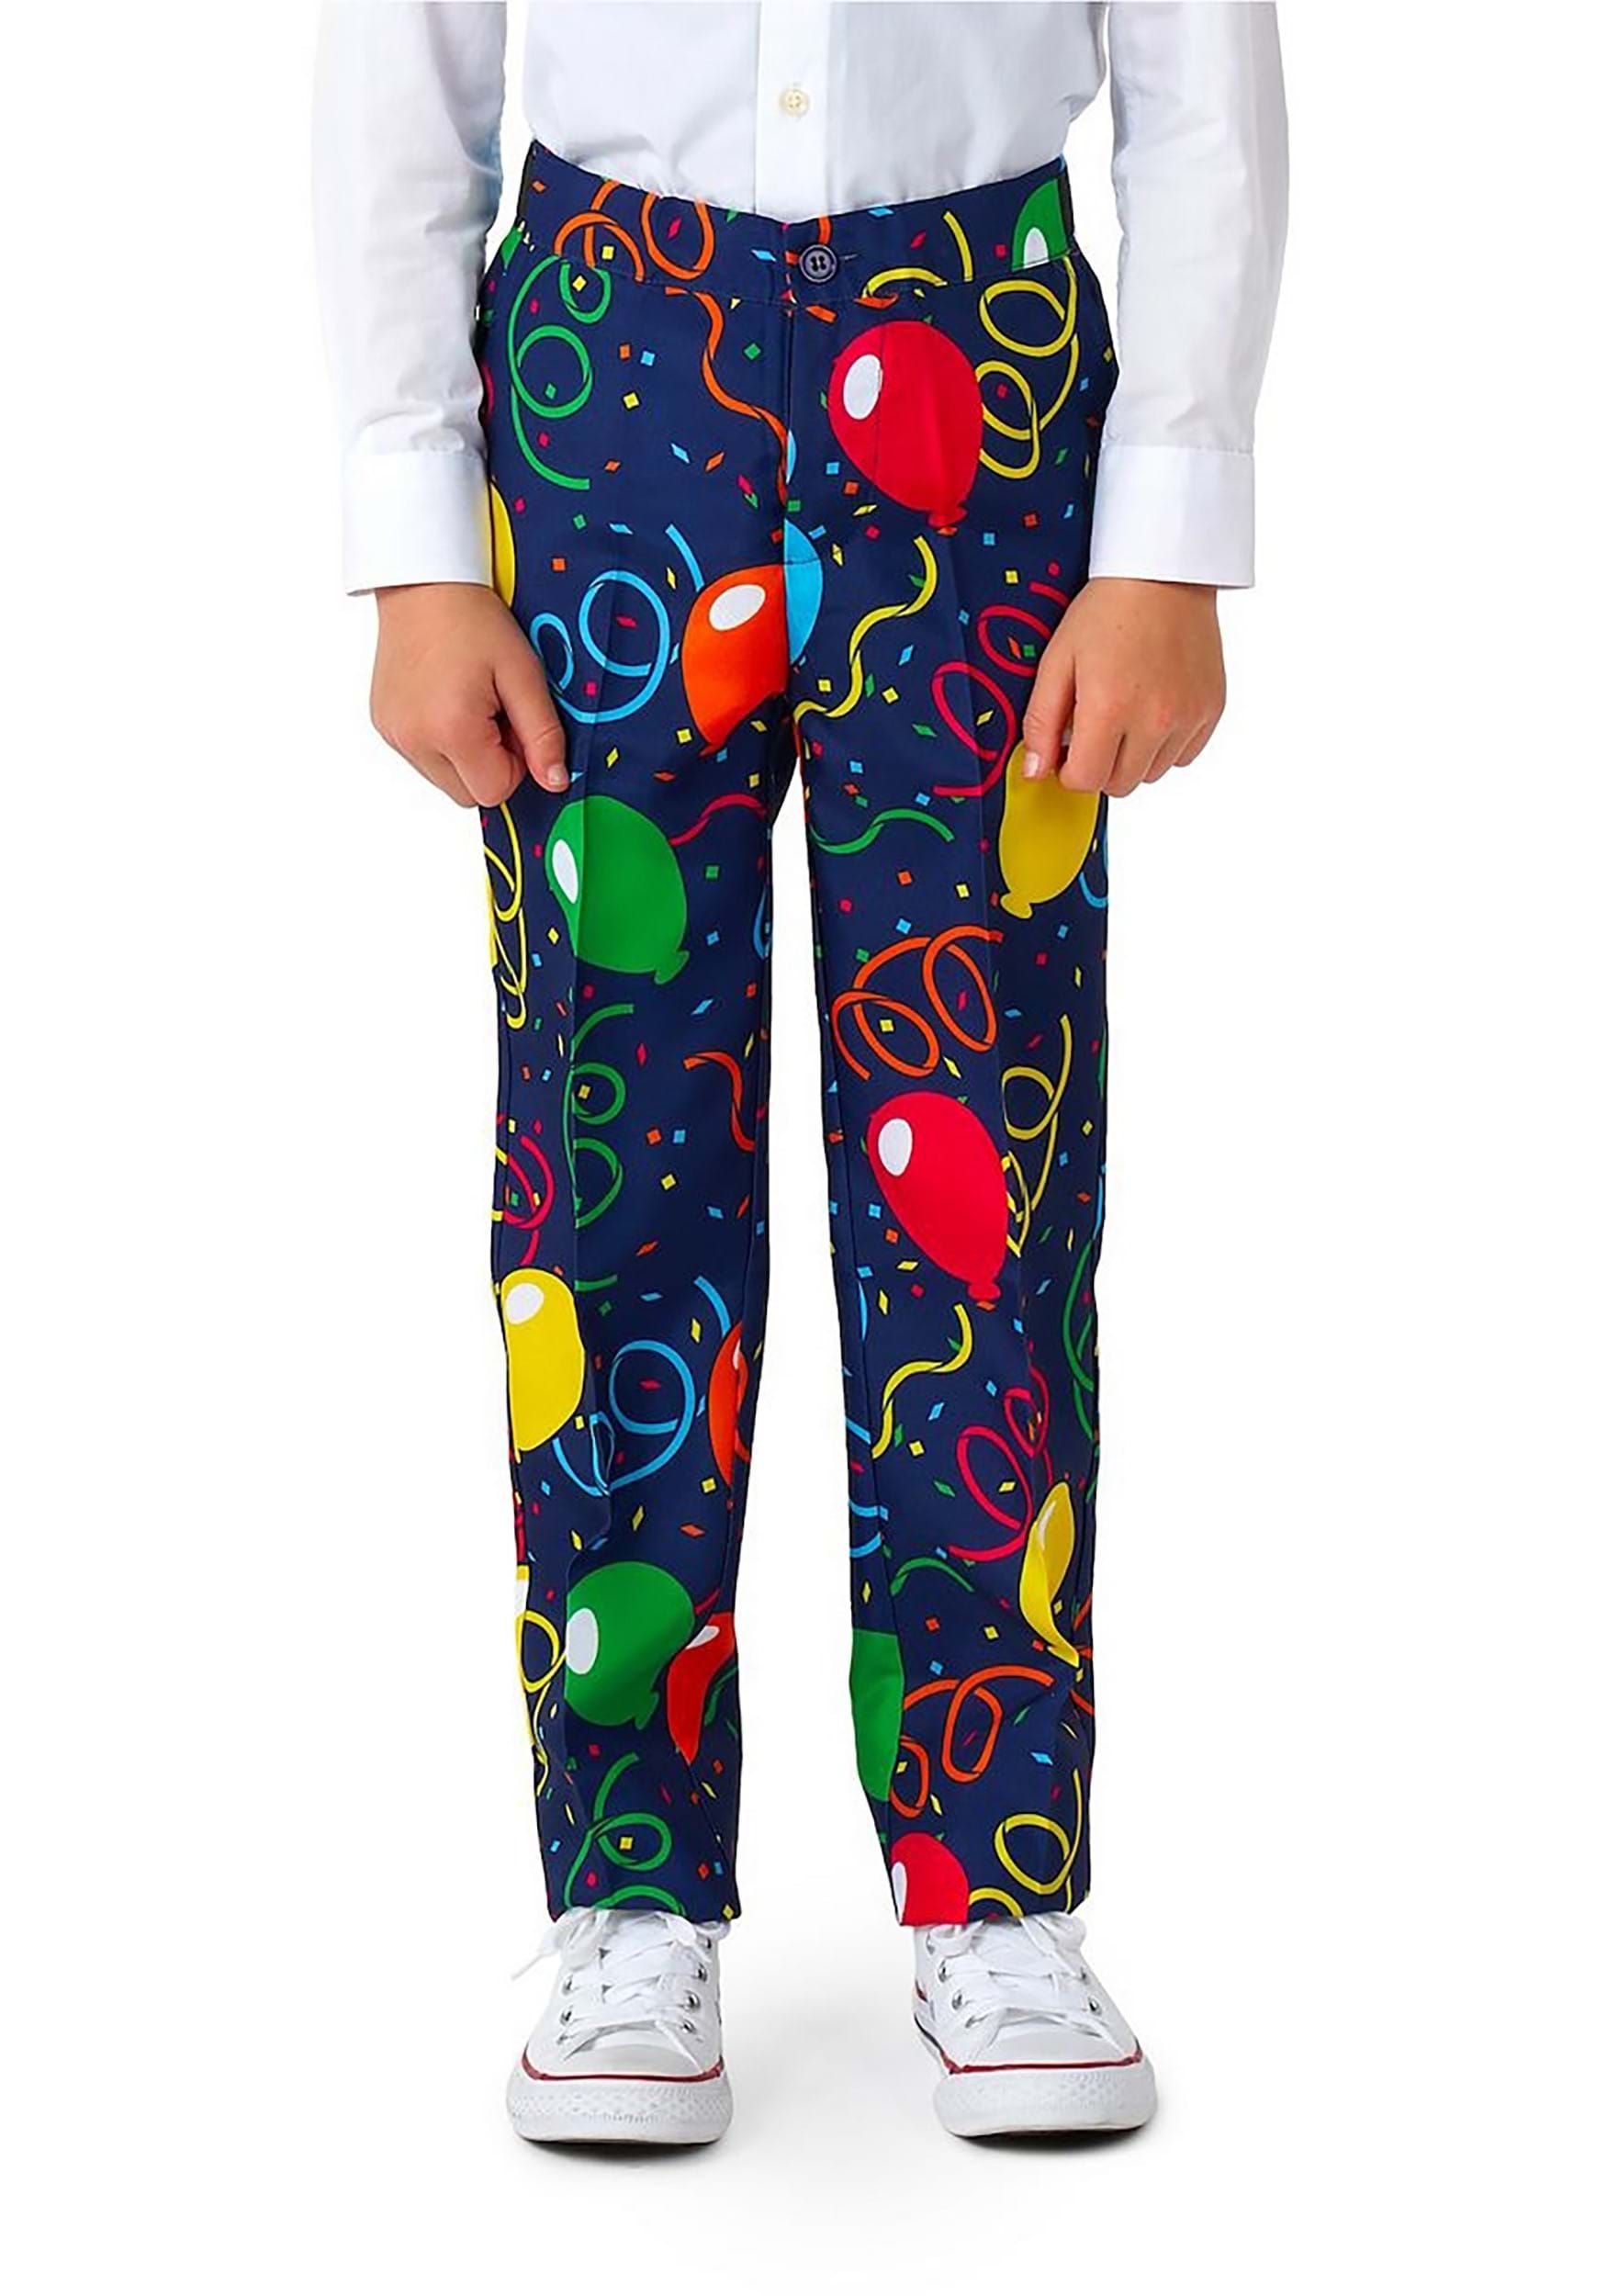 Suitmeister Boys Confetti Balloons Navy Suit